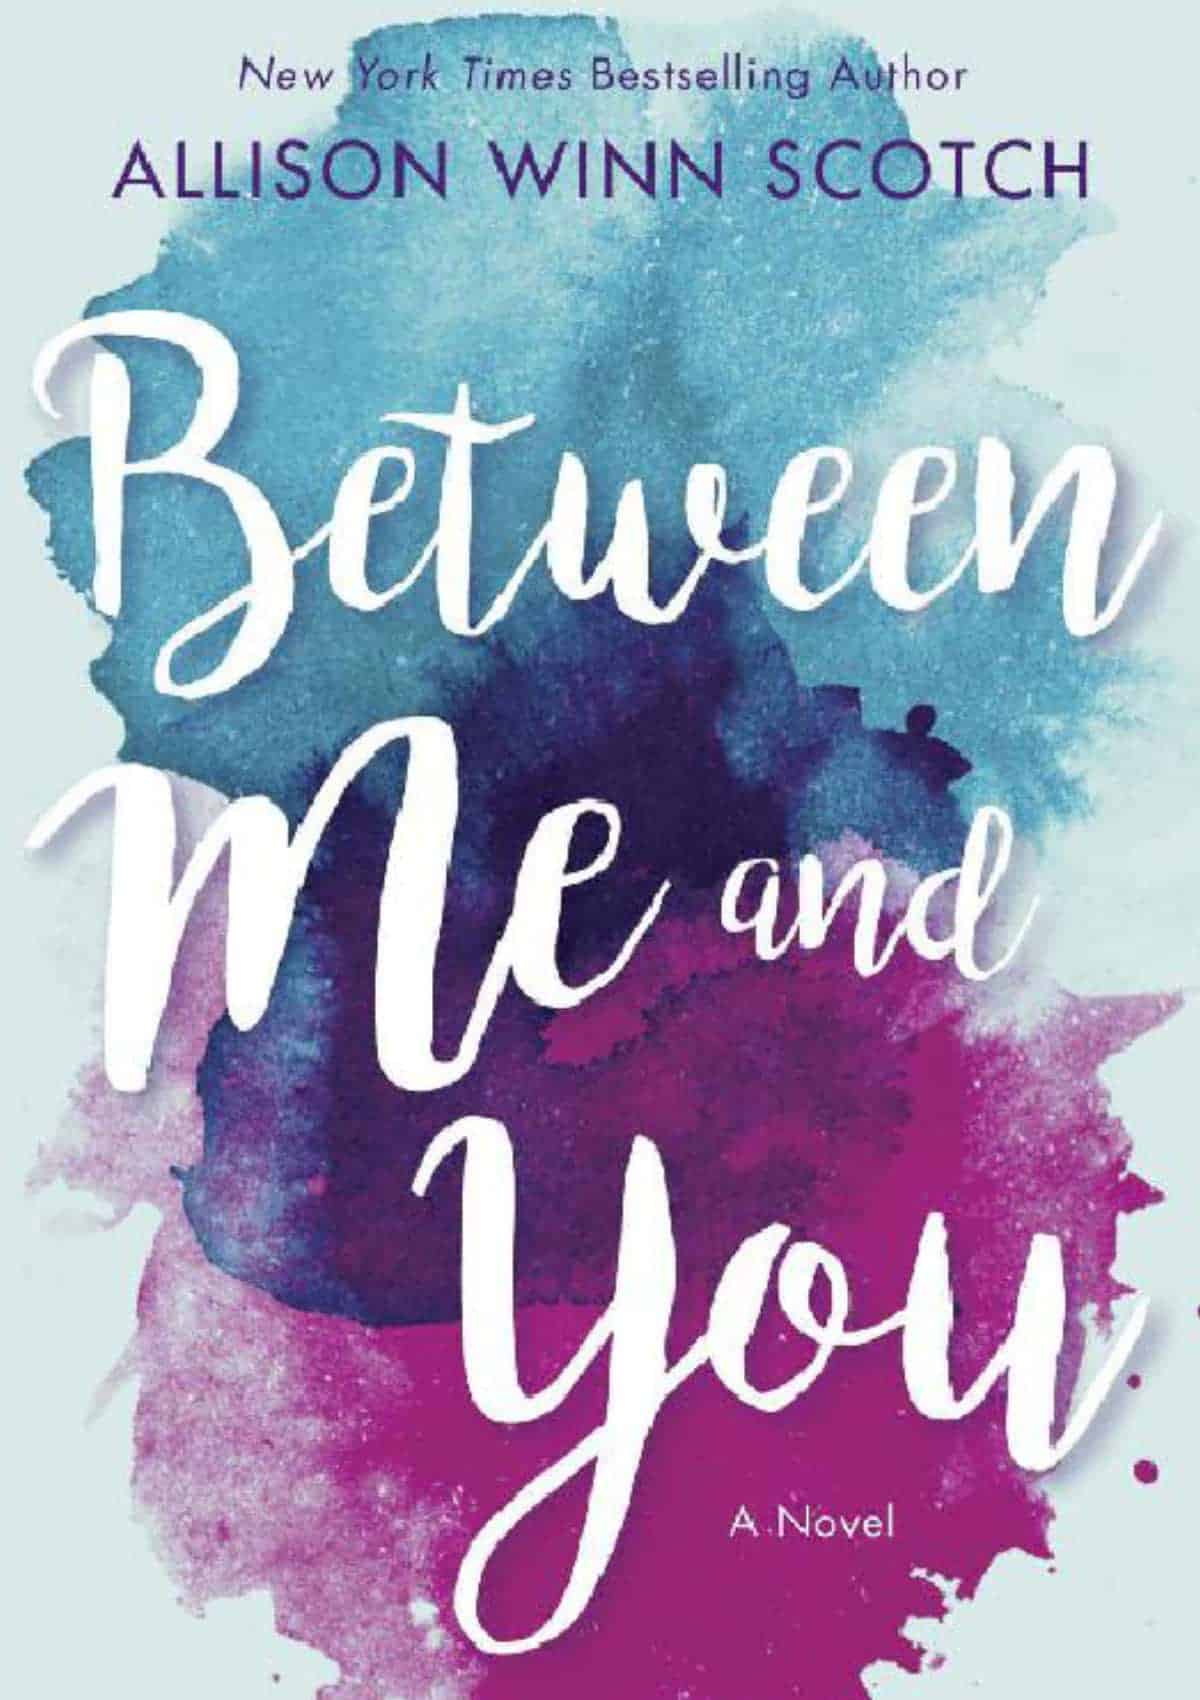 Your Engaged Cousin: Between Me and You by Allison Winn Scotch | Top Kindle Books of 2018 | Gift Ideas For Each Member of the Family